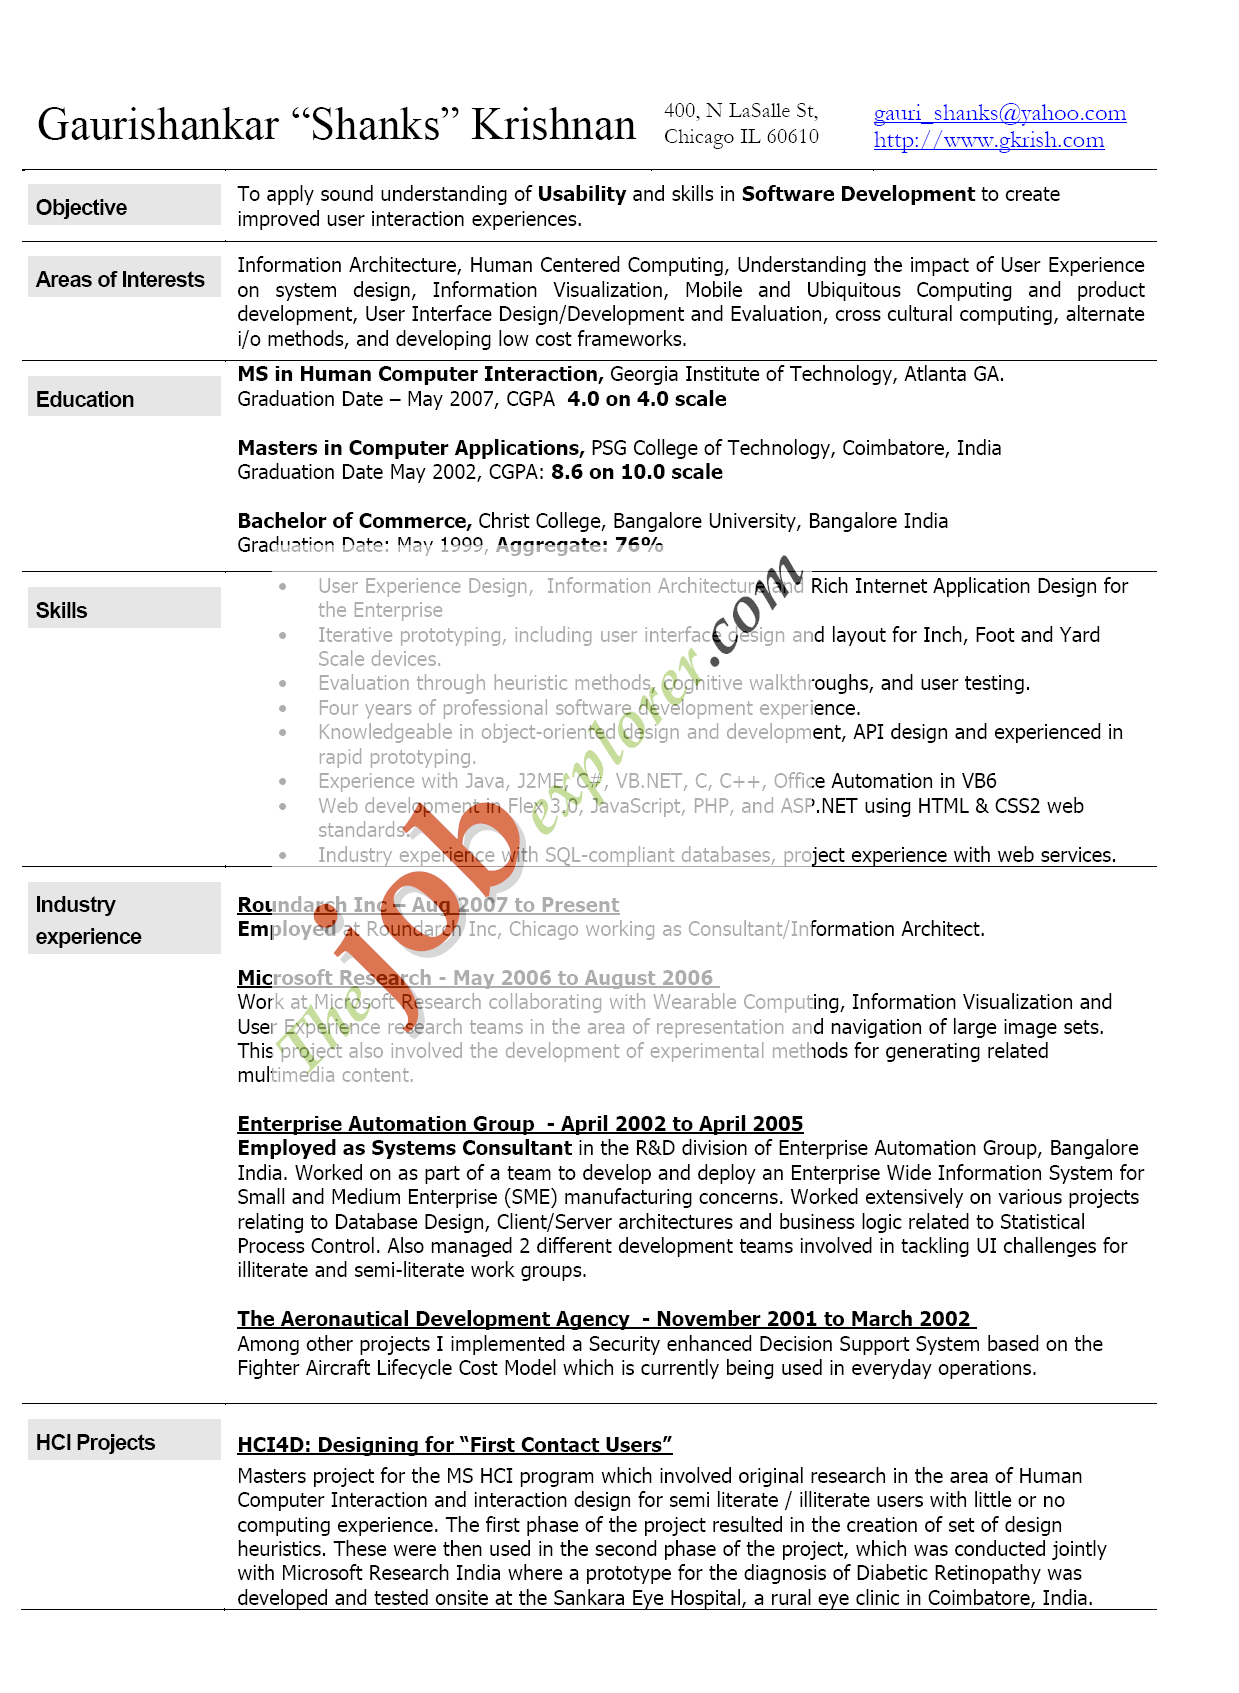 Sample resume and objectives